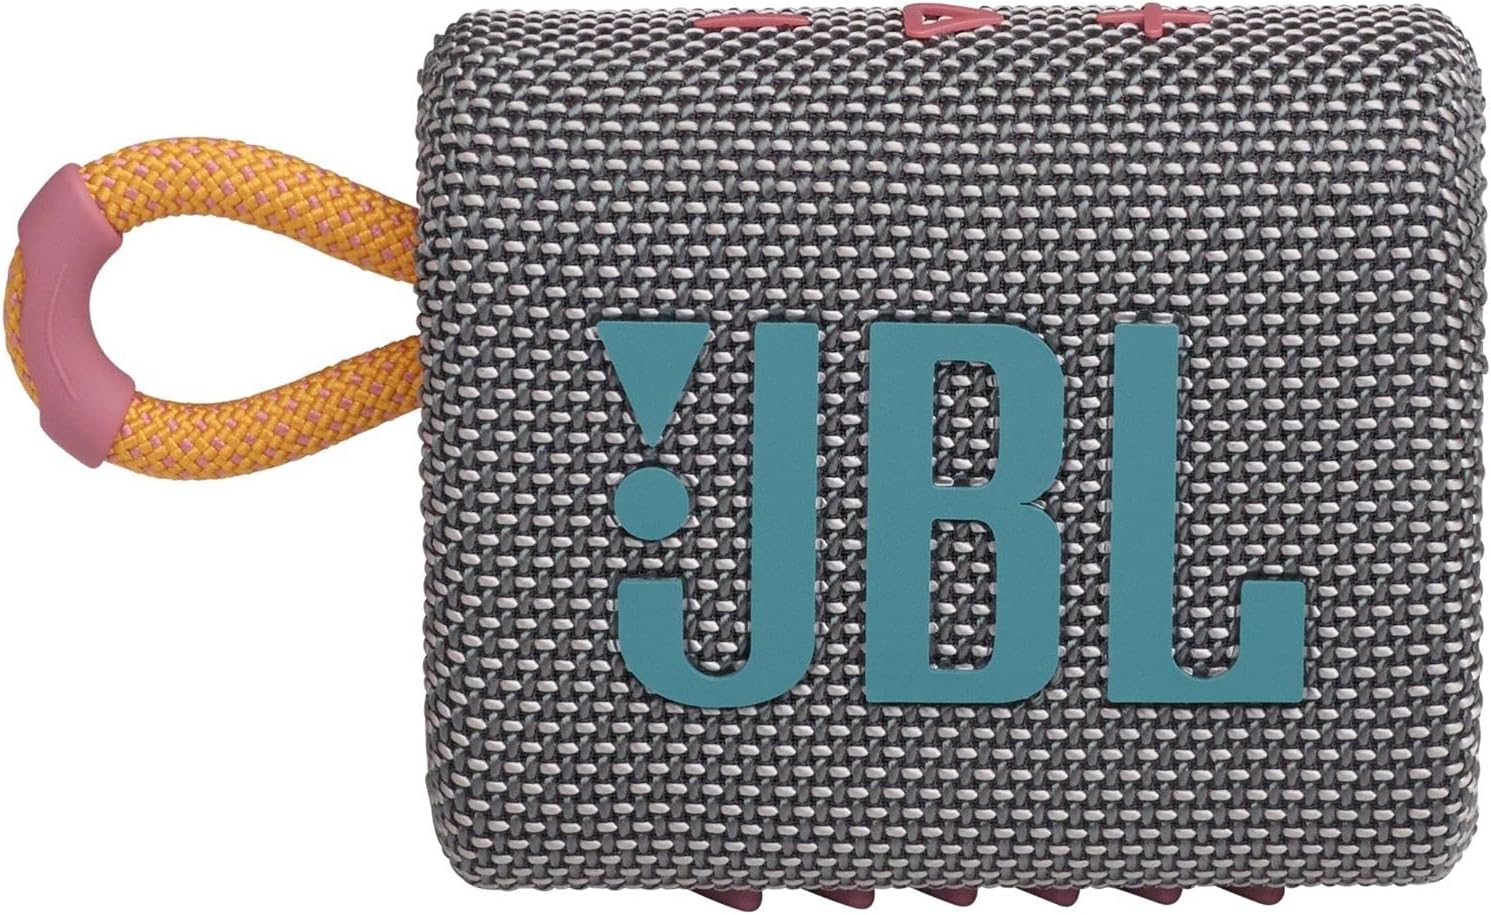 Jbl Go 3 Eco: Portable Speaker With Bluetooth, Built-In Battery, Waterproof And Dustproof Feature - Blue